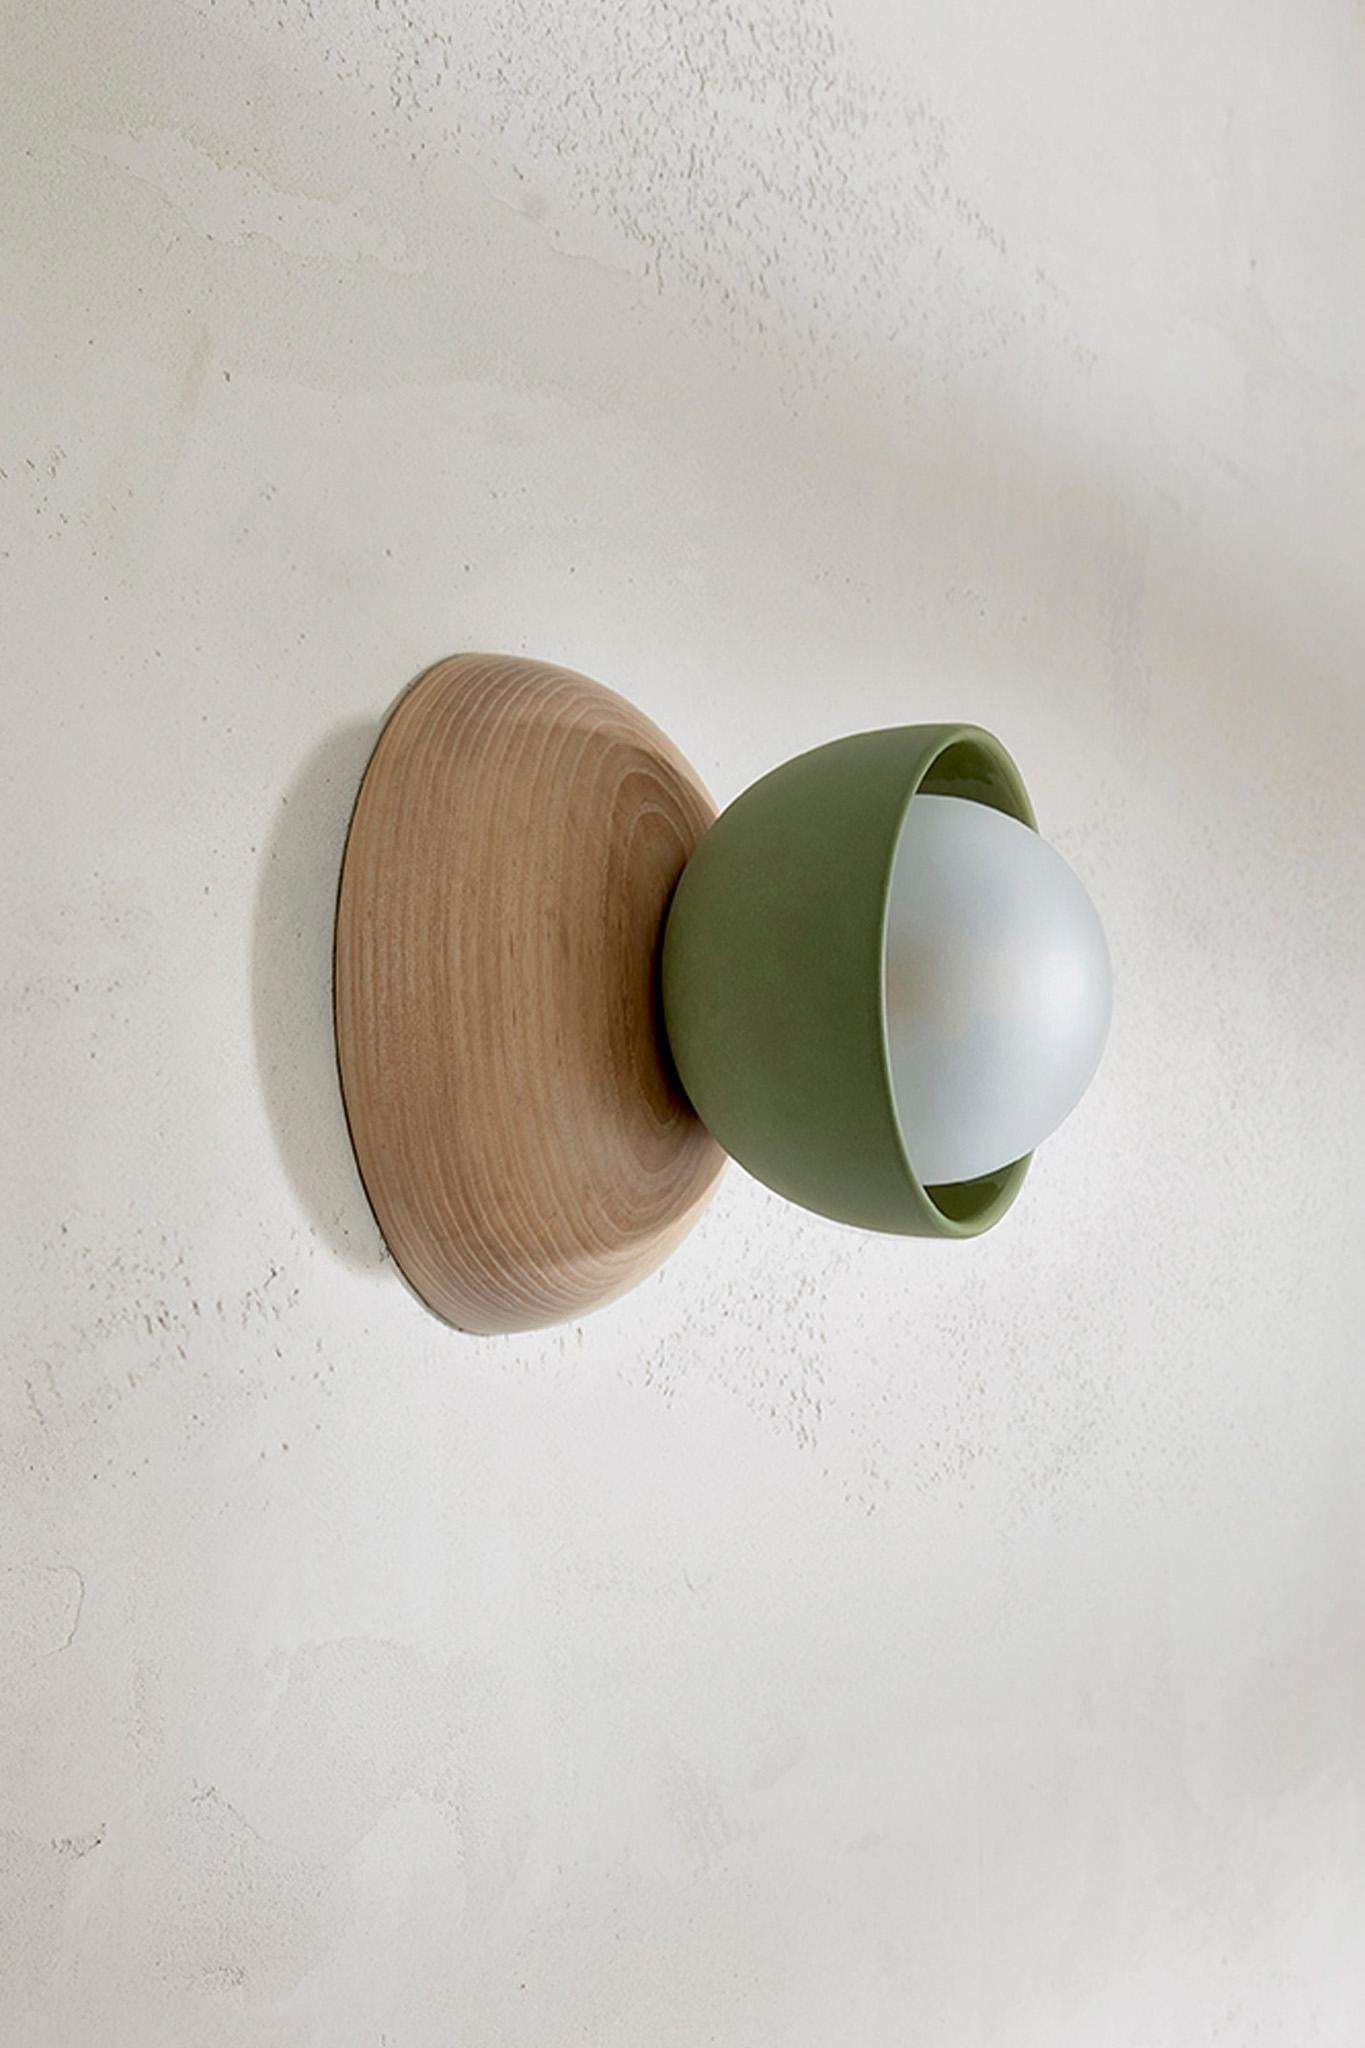 Contemporary Marz Designs, “Terra 00 Surface Sconce”, Ceramic and Timber Surface Sconce For Sale